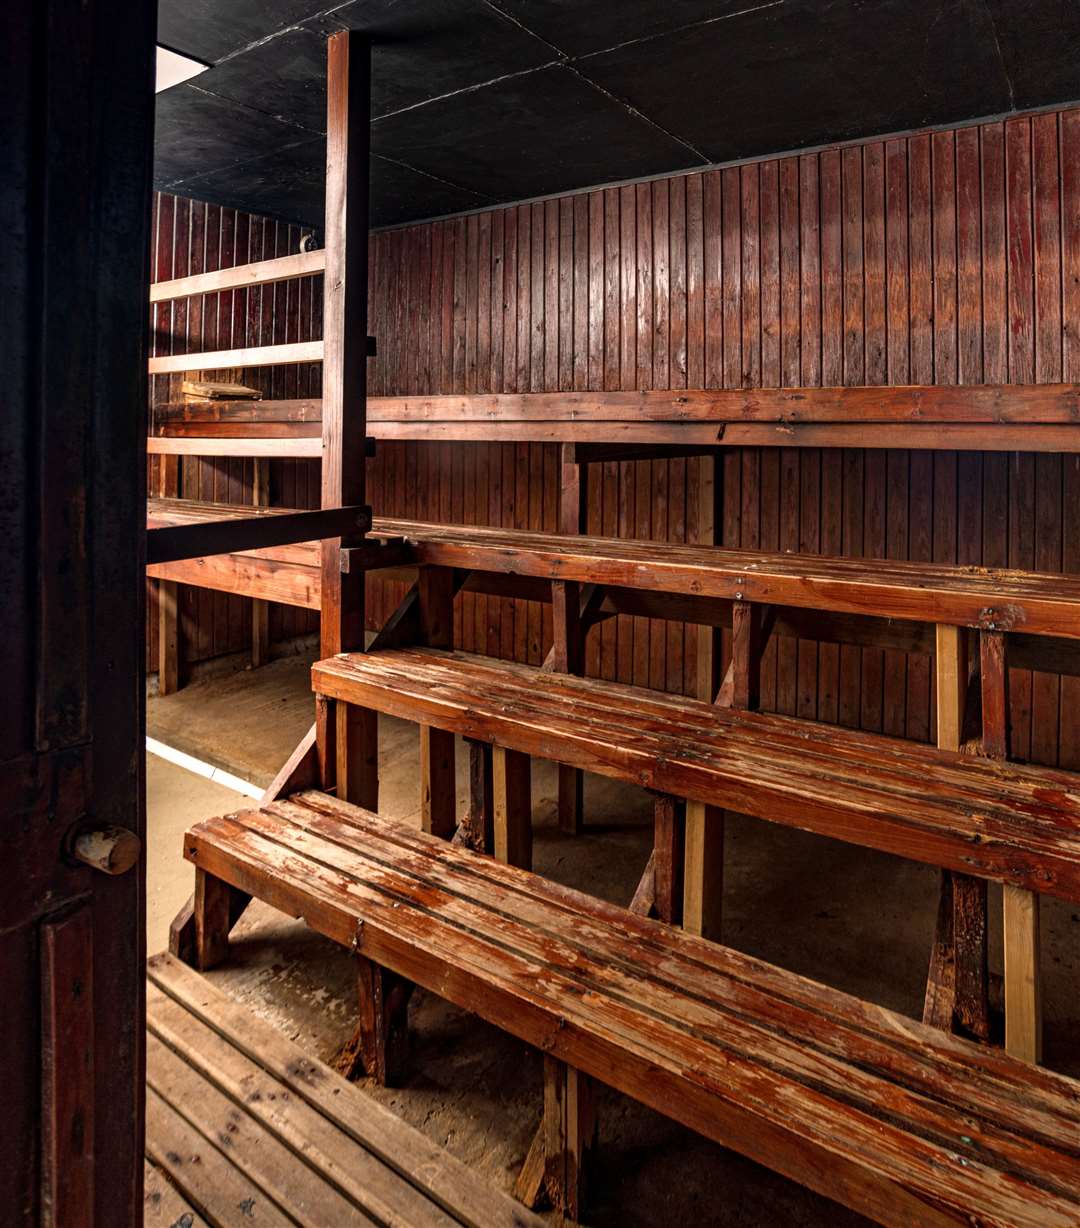 Inside the sauna cabin of the 1948 Olympic building